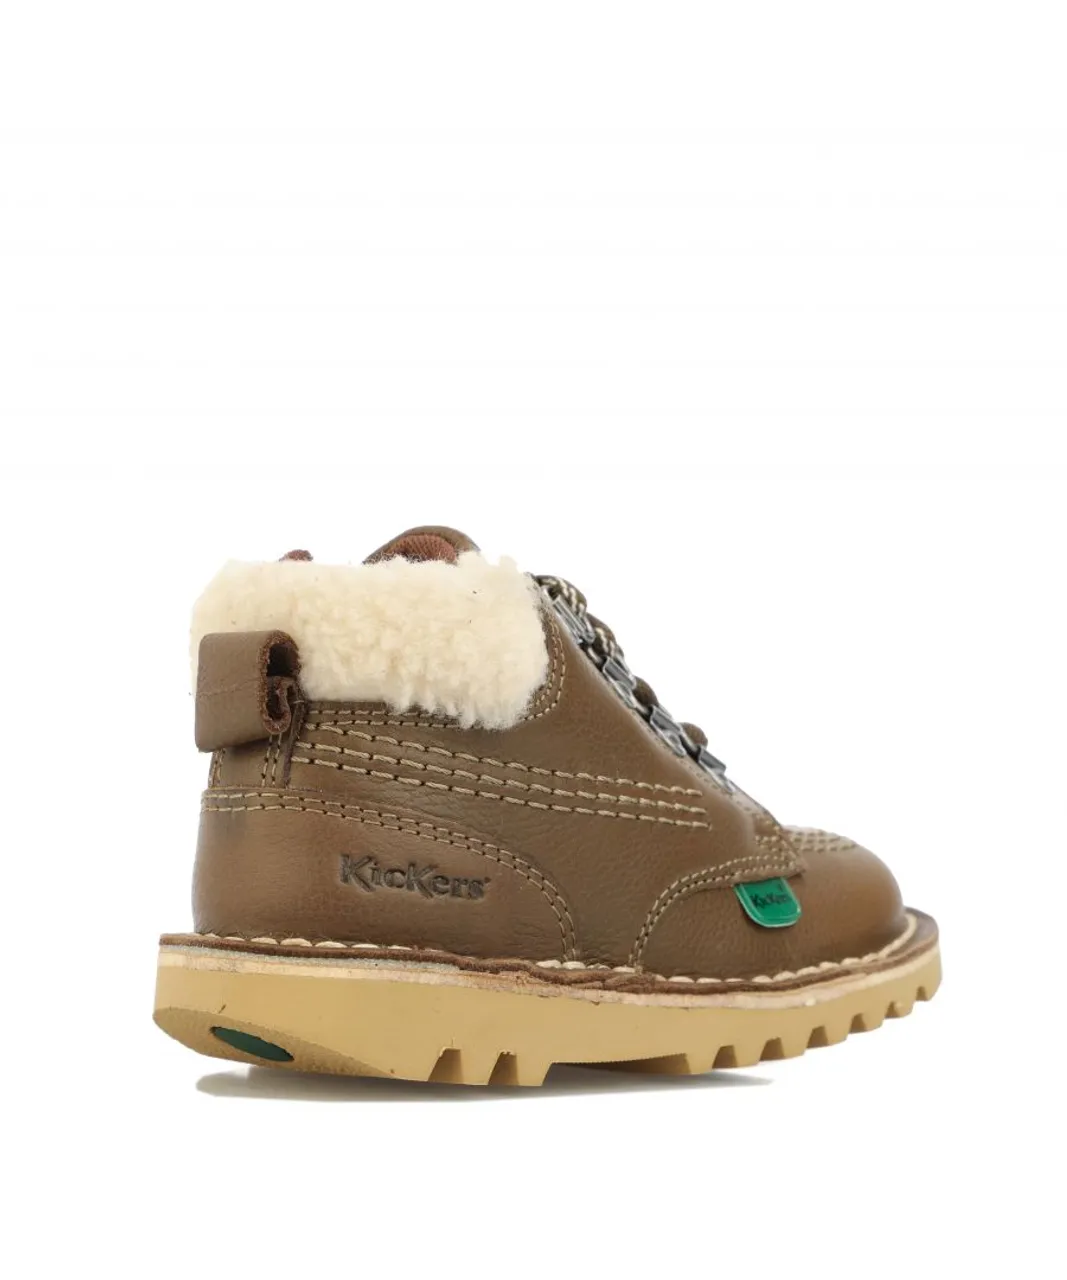 Kickers Boys Boy's Kick Hi Winter Boots in Khaki Leather (archived)